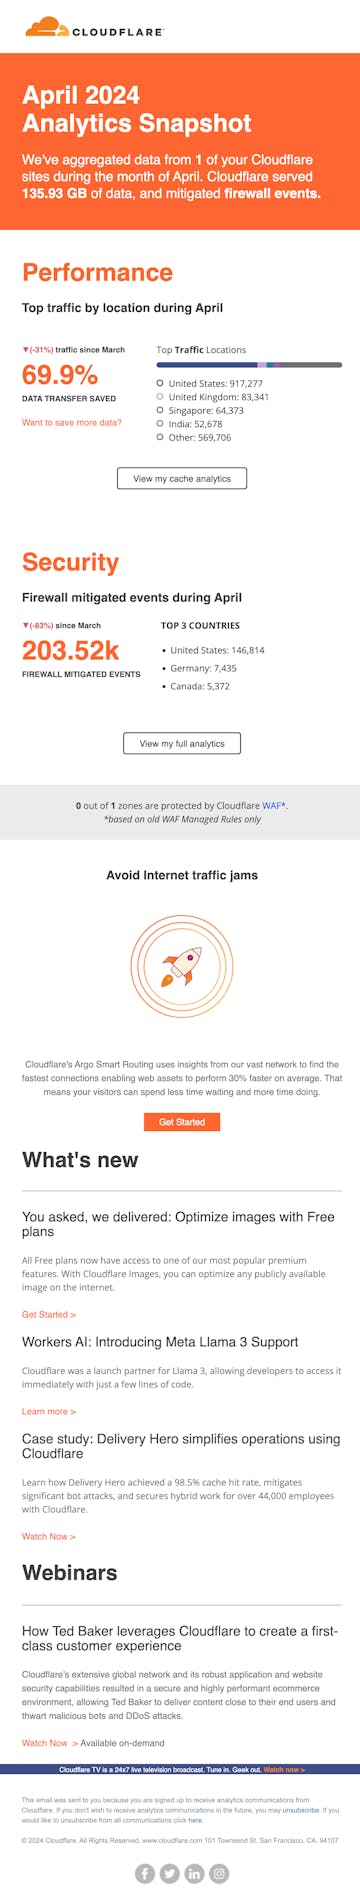 Cloudflare email design Thumbnail Preview